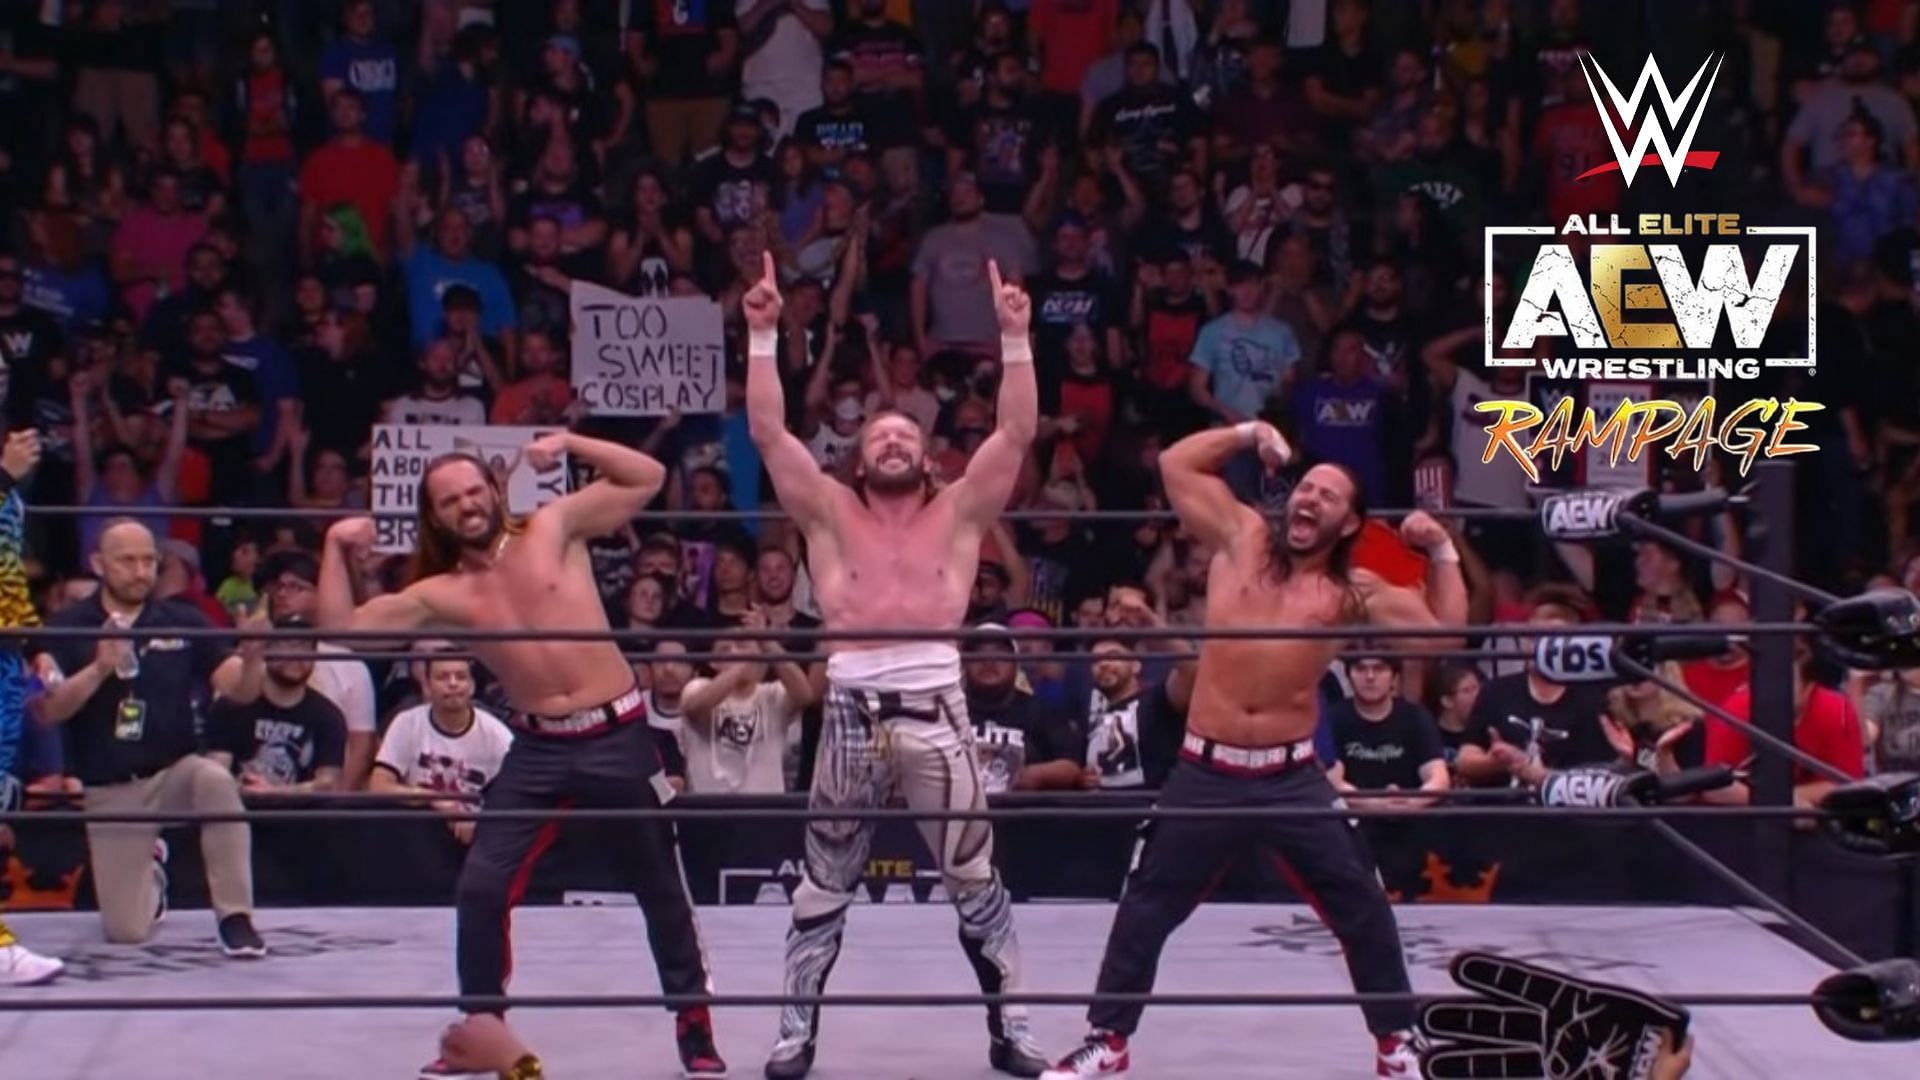 It was another interesting edition of AEW Rampage